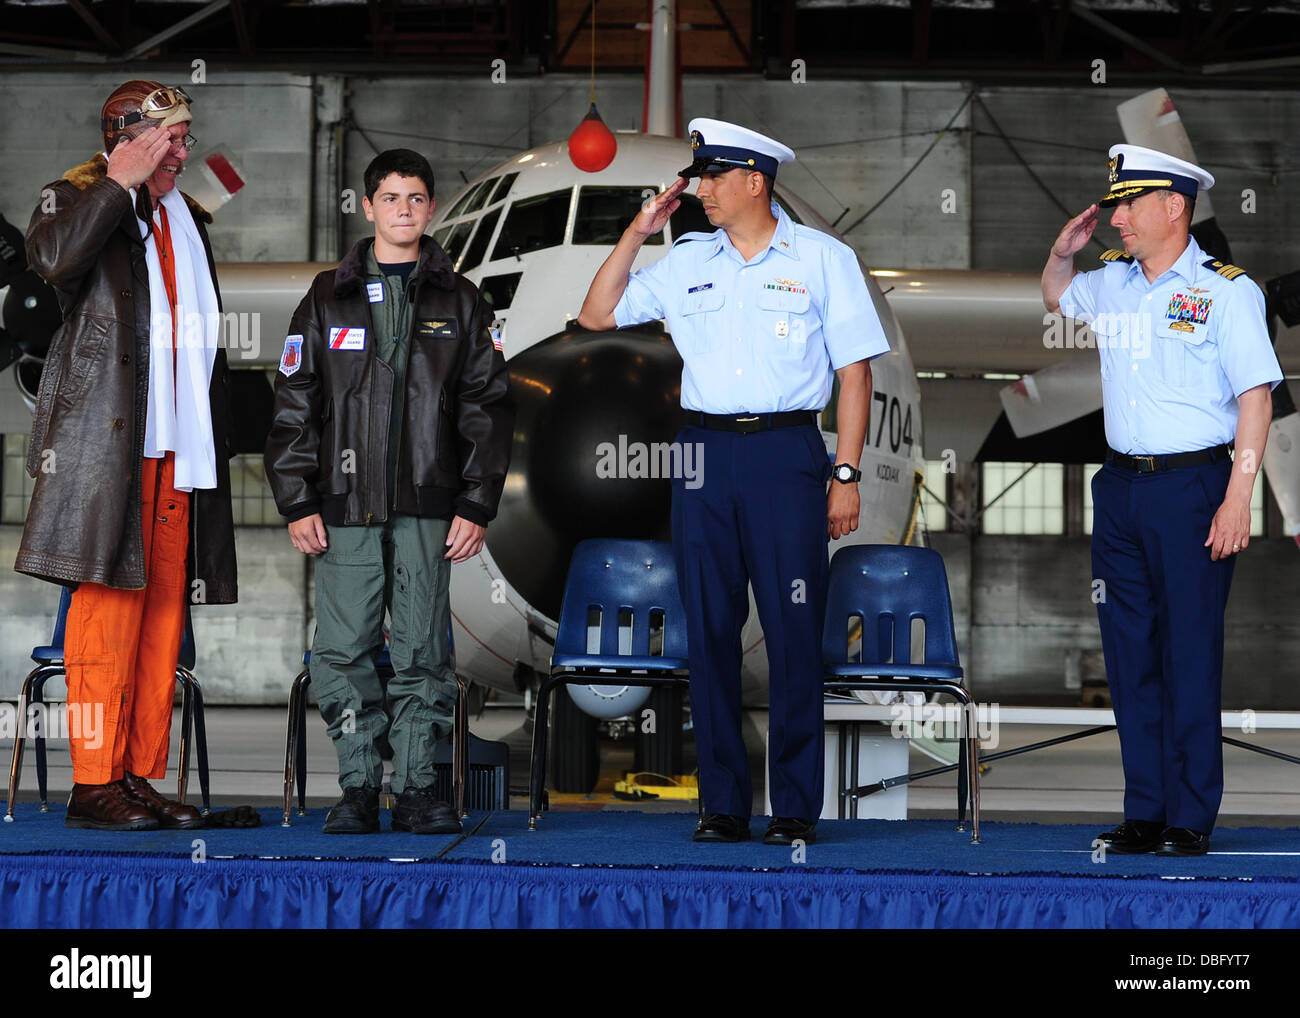 Braeden Hahn, a visitor to Coast Guard Air Station Kodiak sponsored by the Make-A-Wish foundation, is saluted by top ranking Air Station Kodiak officials at a wing-pinning ceremony in Kodiak, Alaska, July 25, 2013. The wing pinning ceremony is a high Coas Stock Photo